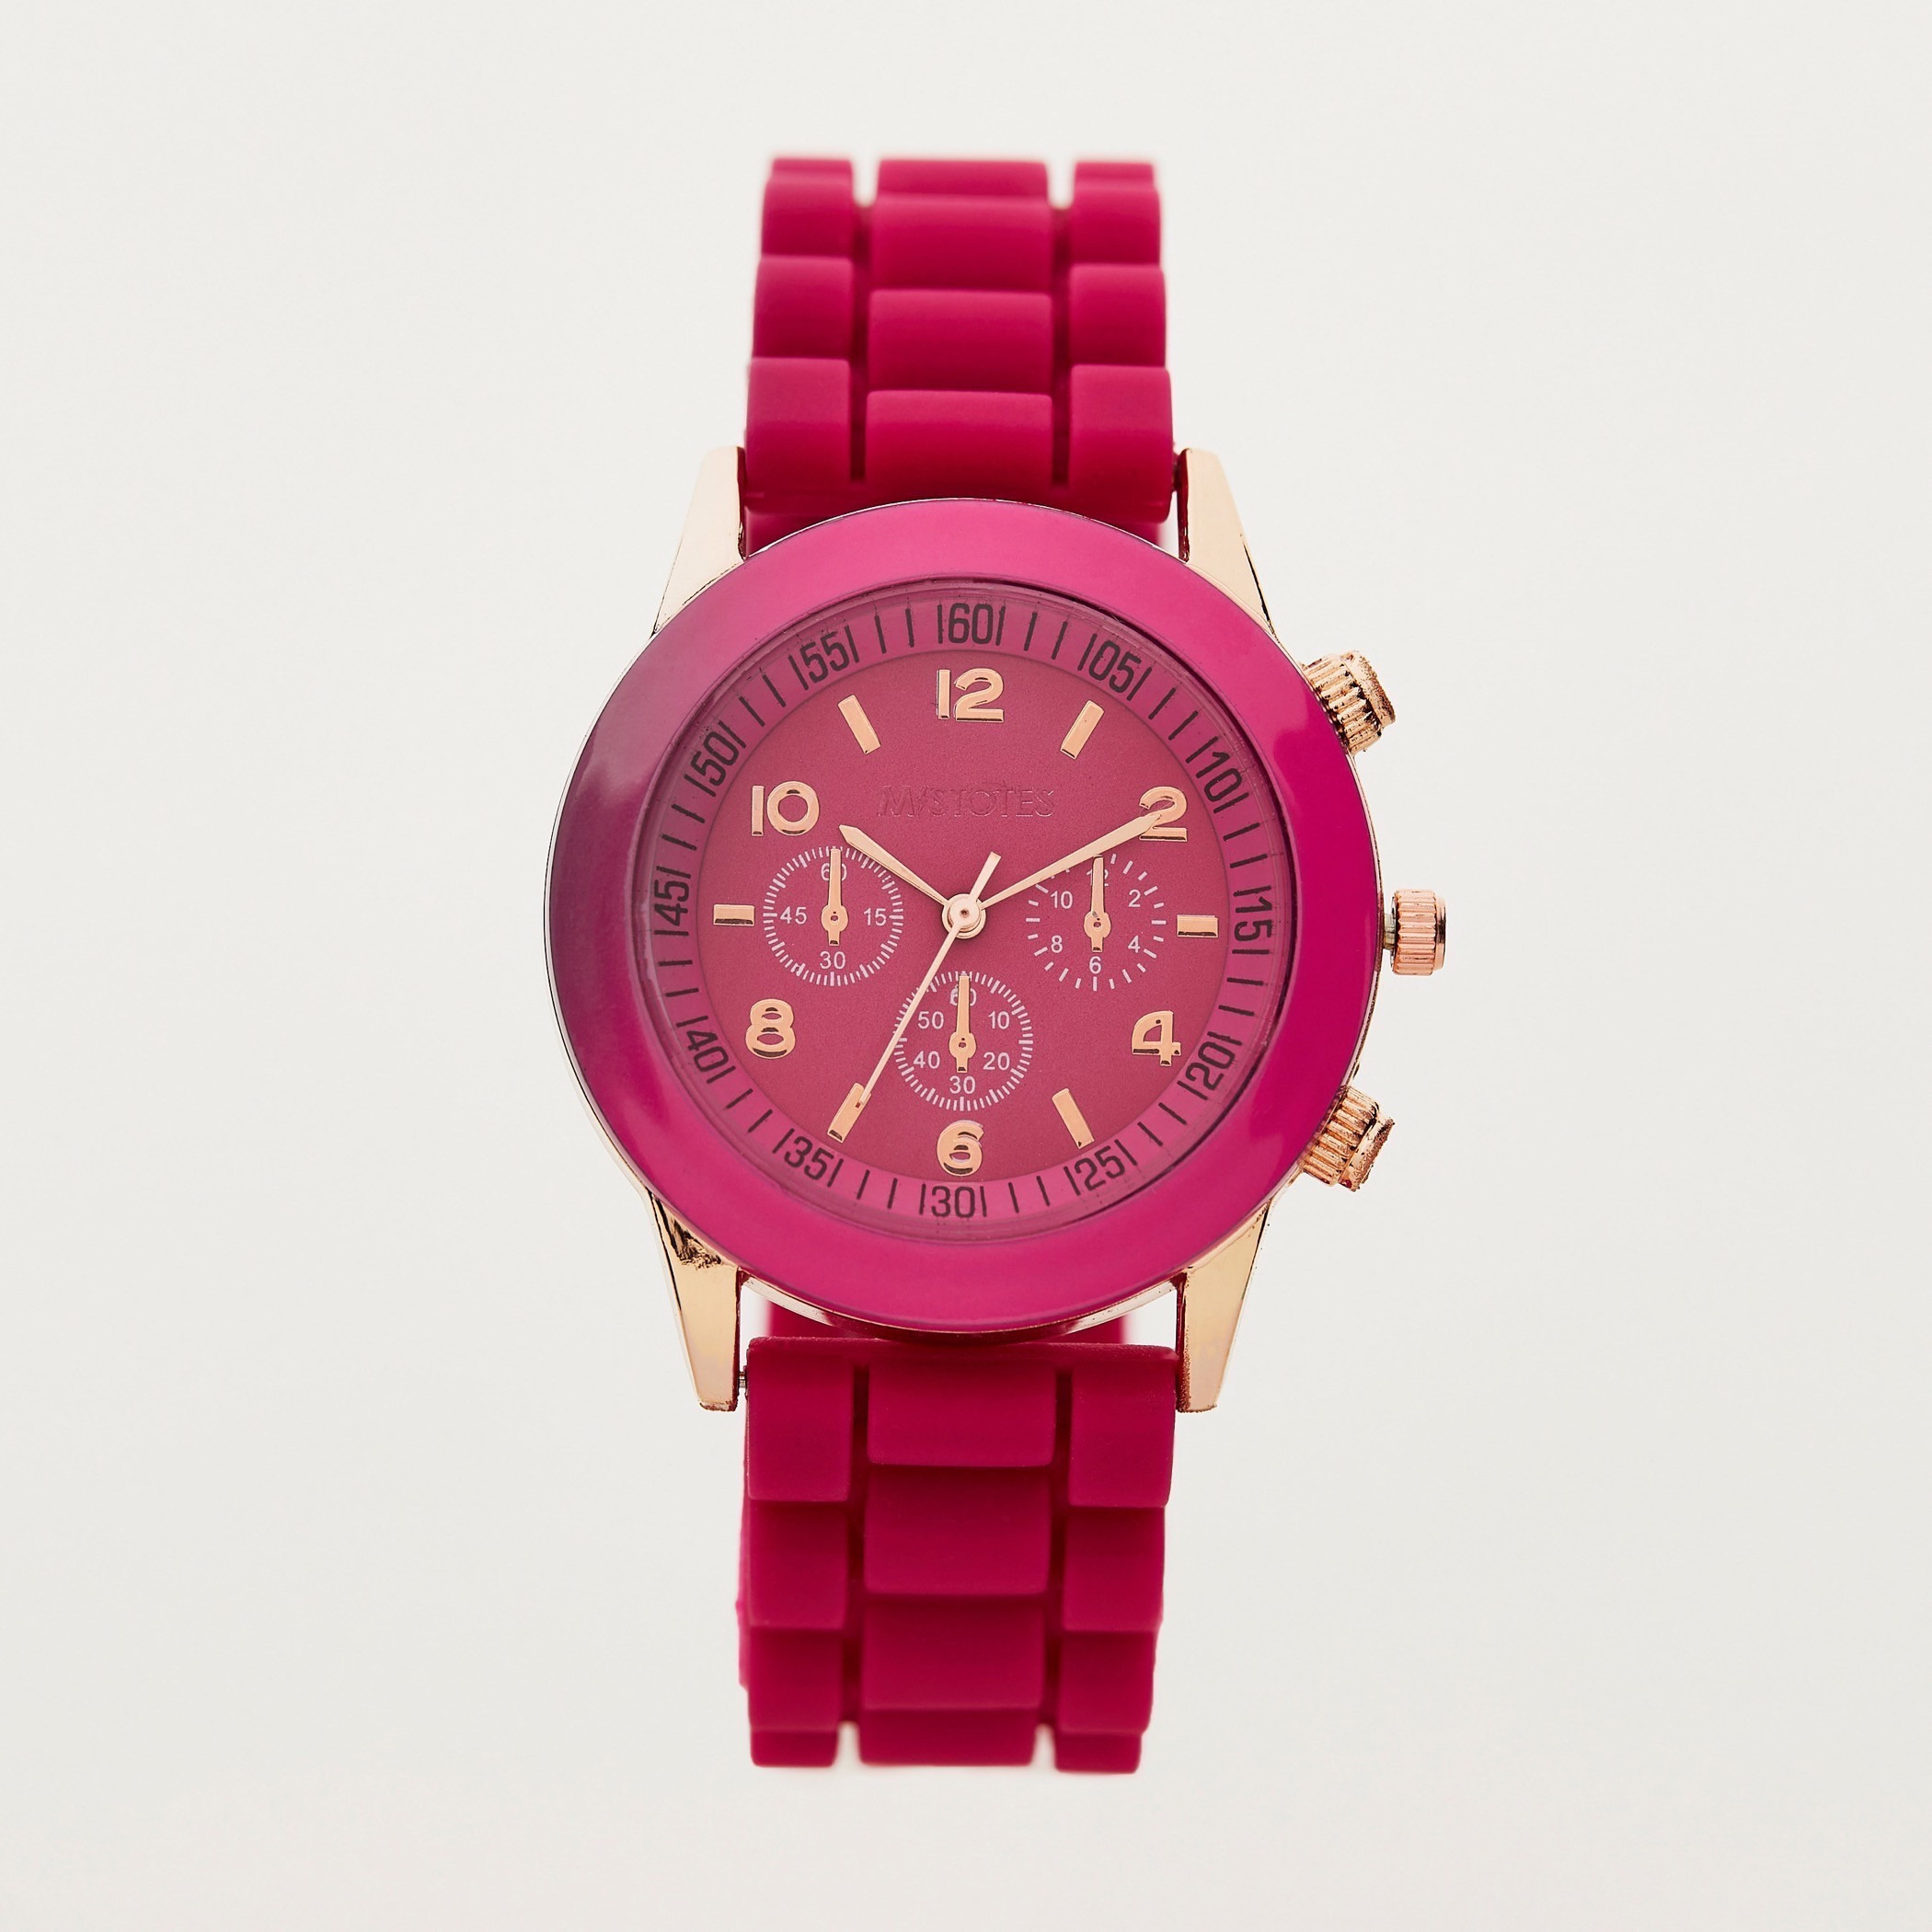 Buy Womens Mistotes Chronograph Dial Sports Wrist Watch Online Centrepoint UAE